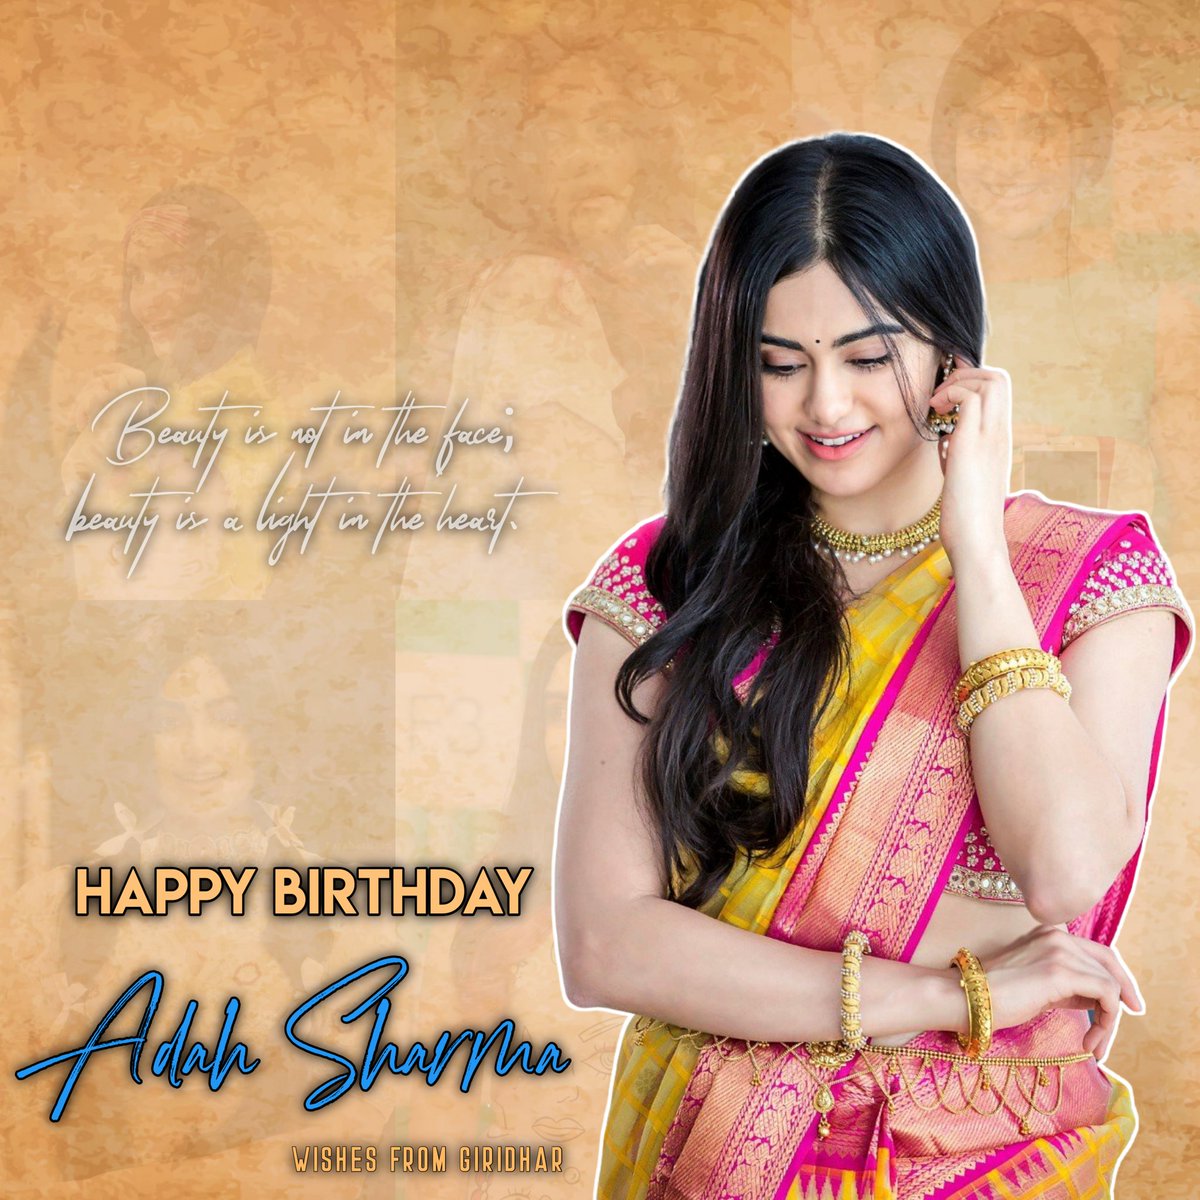 Wishing The Most Talented And Beautiful Actress @adah_sharma A Very Happy Birthday ❤️

All The Best For Your Future Endeavors

#adahsharma #adah #HappyBirthdayAdahSharma